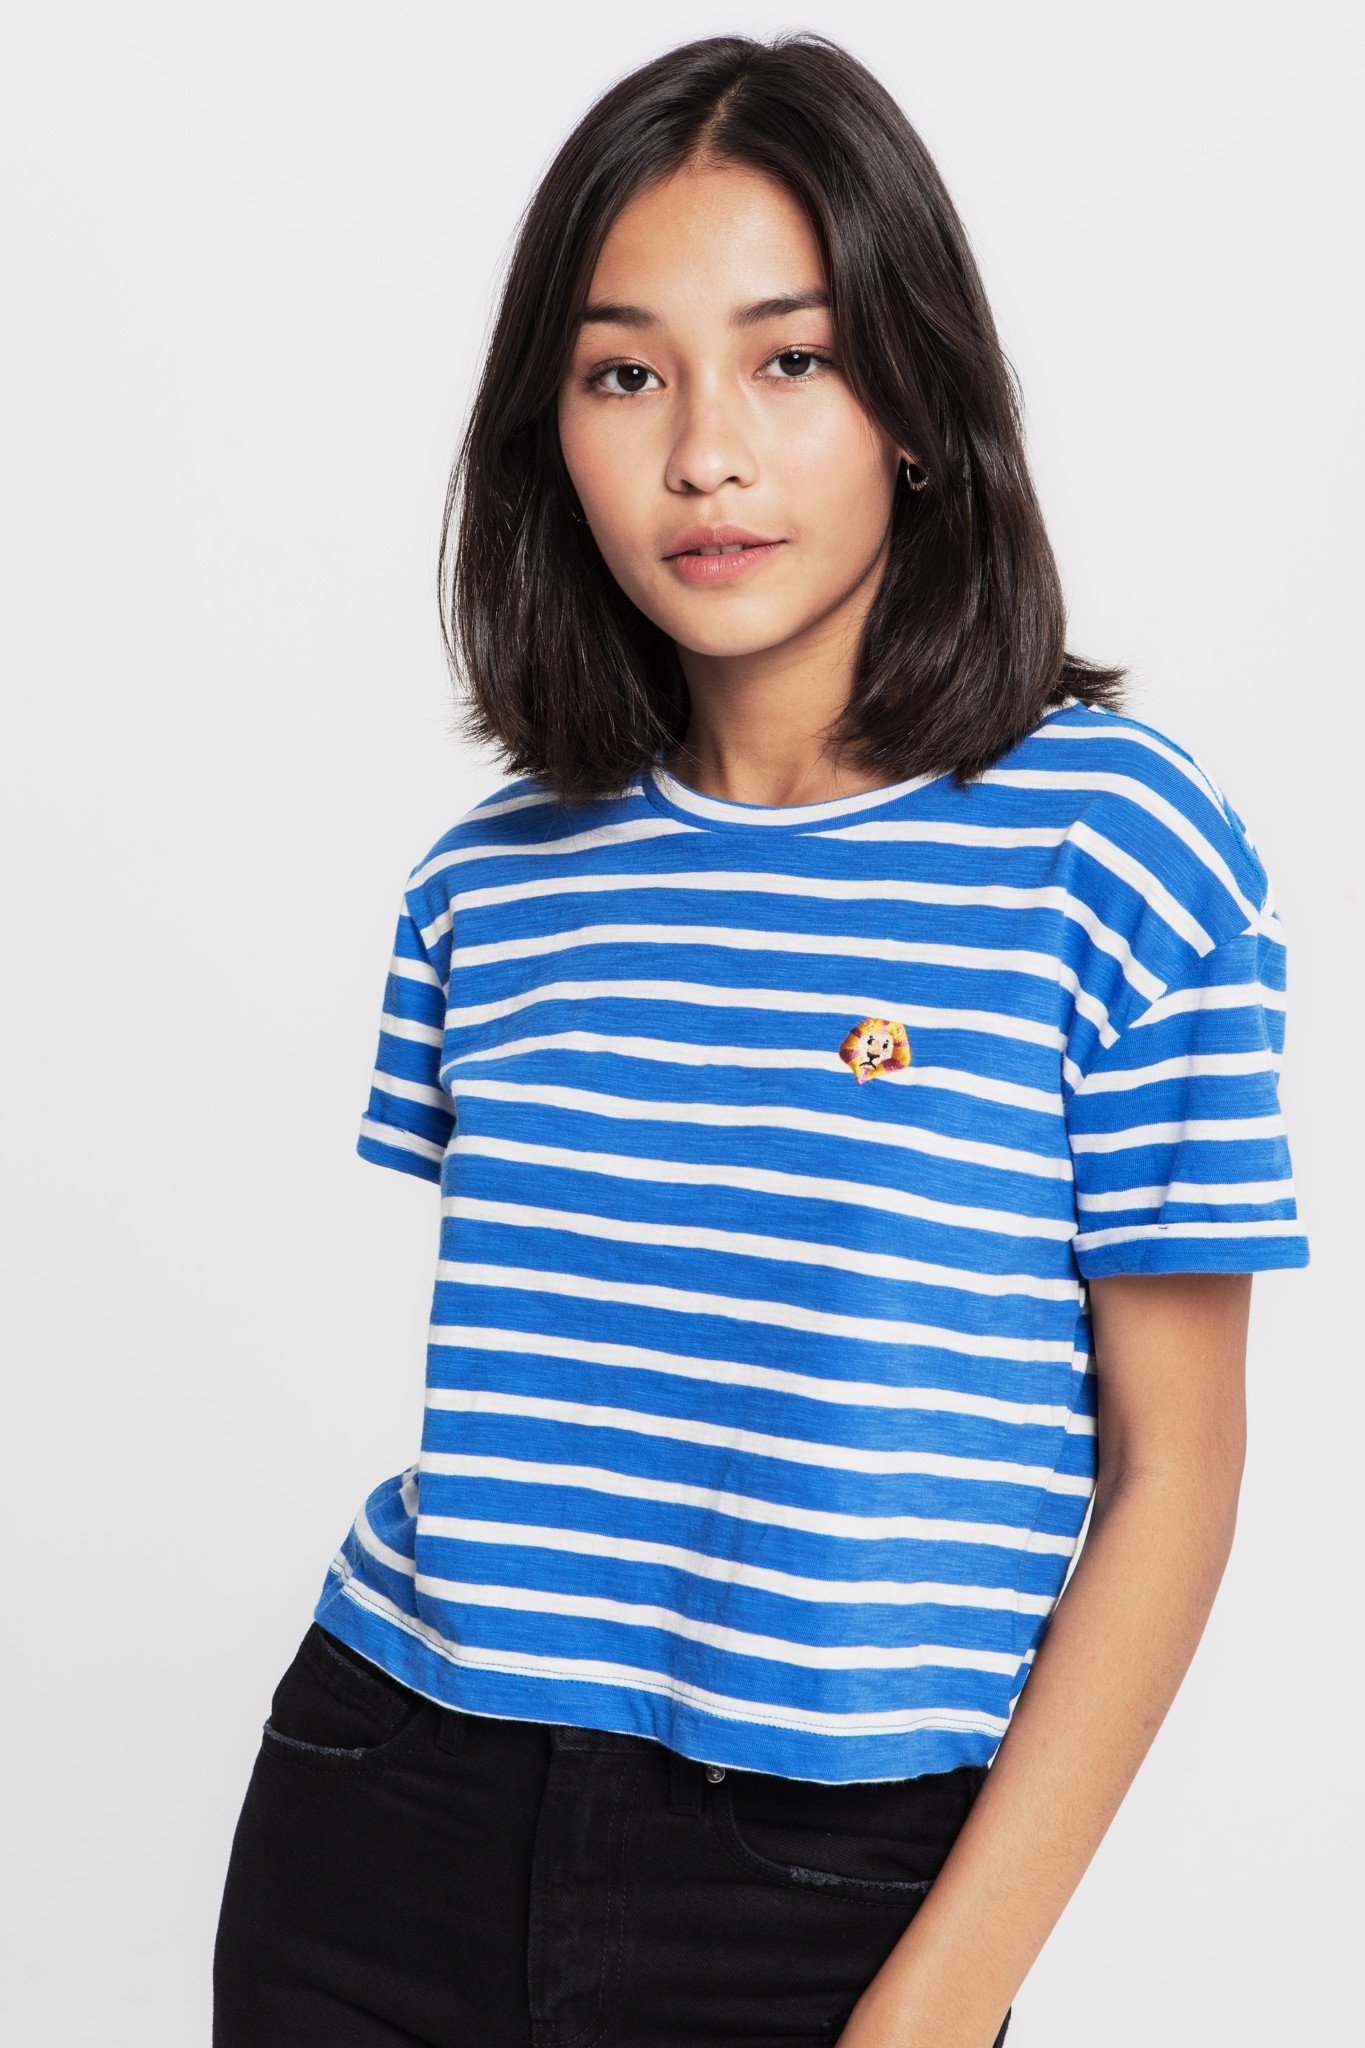 THE CROP T - BLUE STRIPE WITH LION HEART